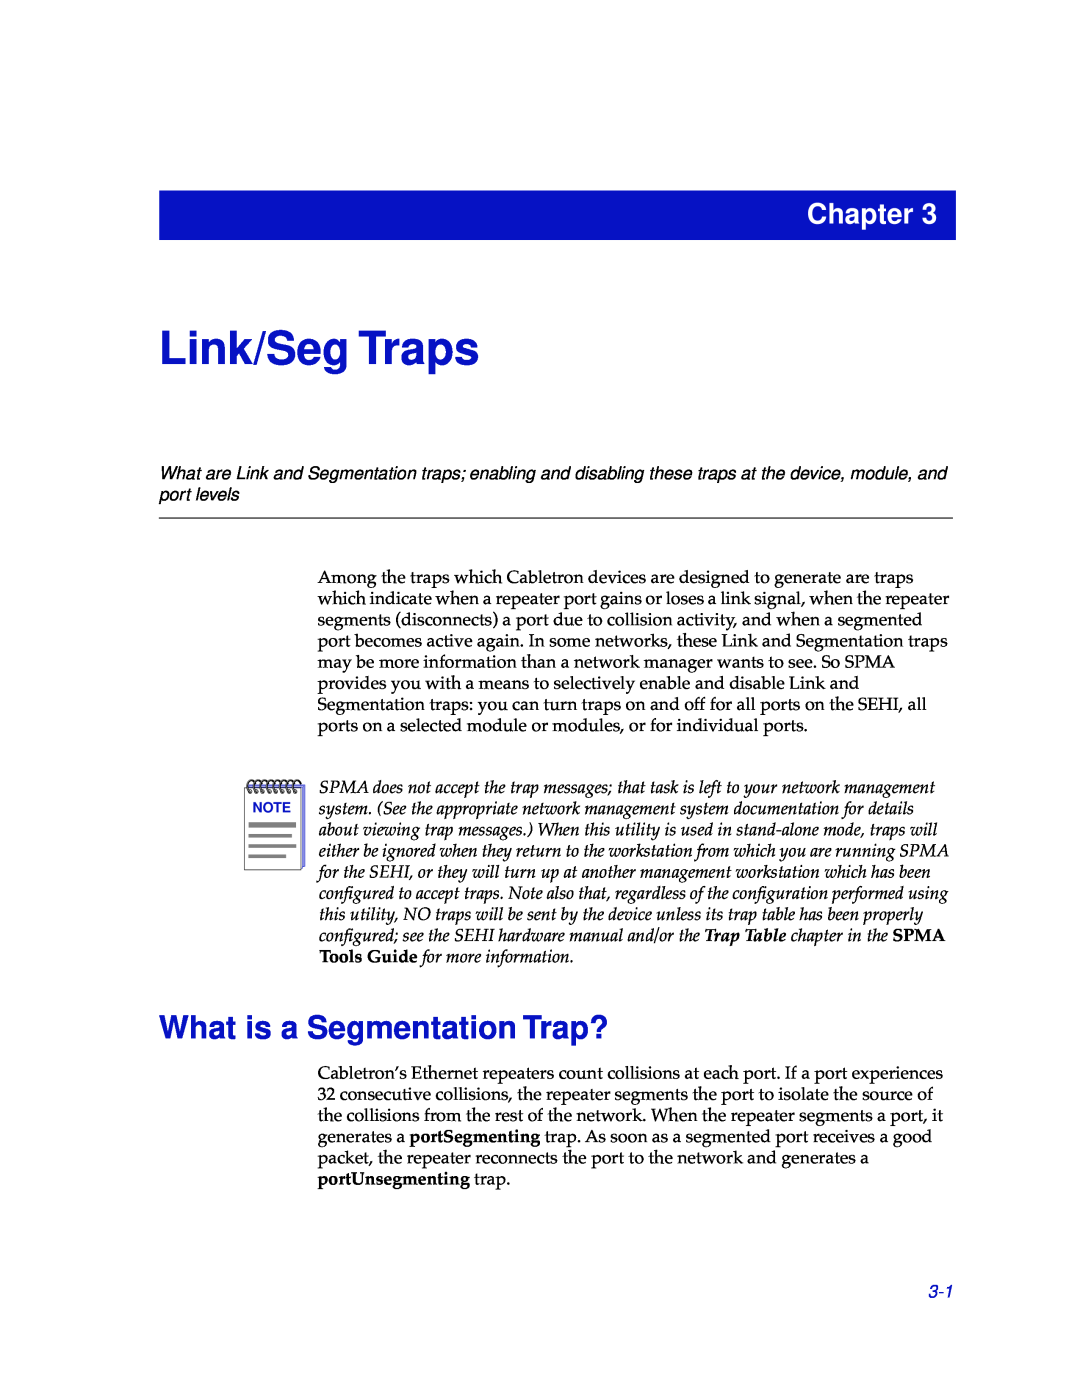 Cabletron Systems SEHI-22/24, SEHI-32/34 manual Link/Seg Traps, What is a Segmentation Trap?, Chapter 